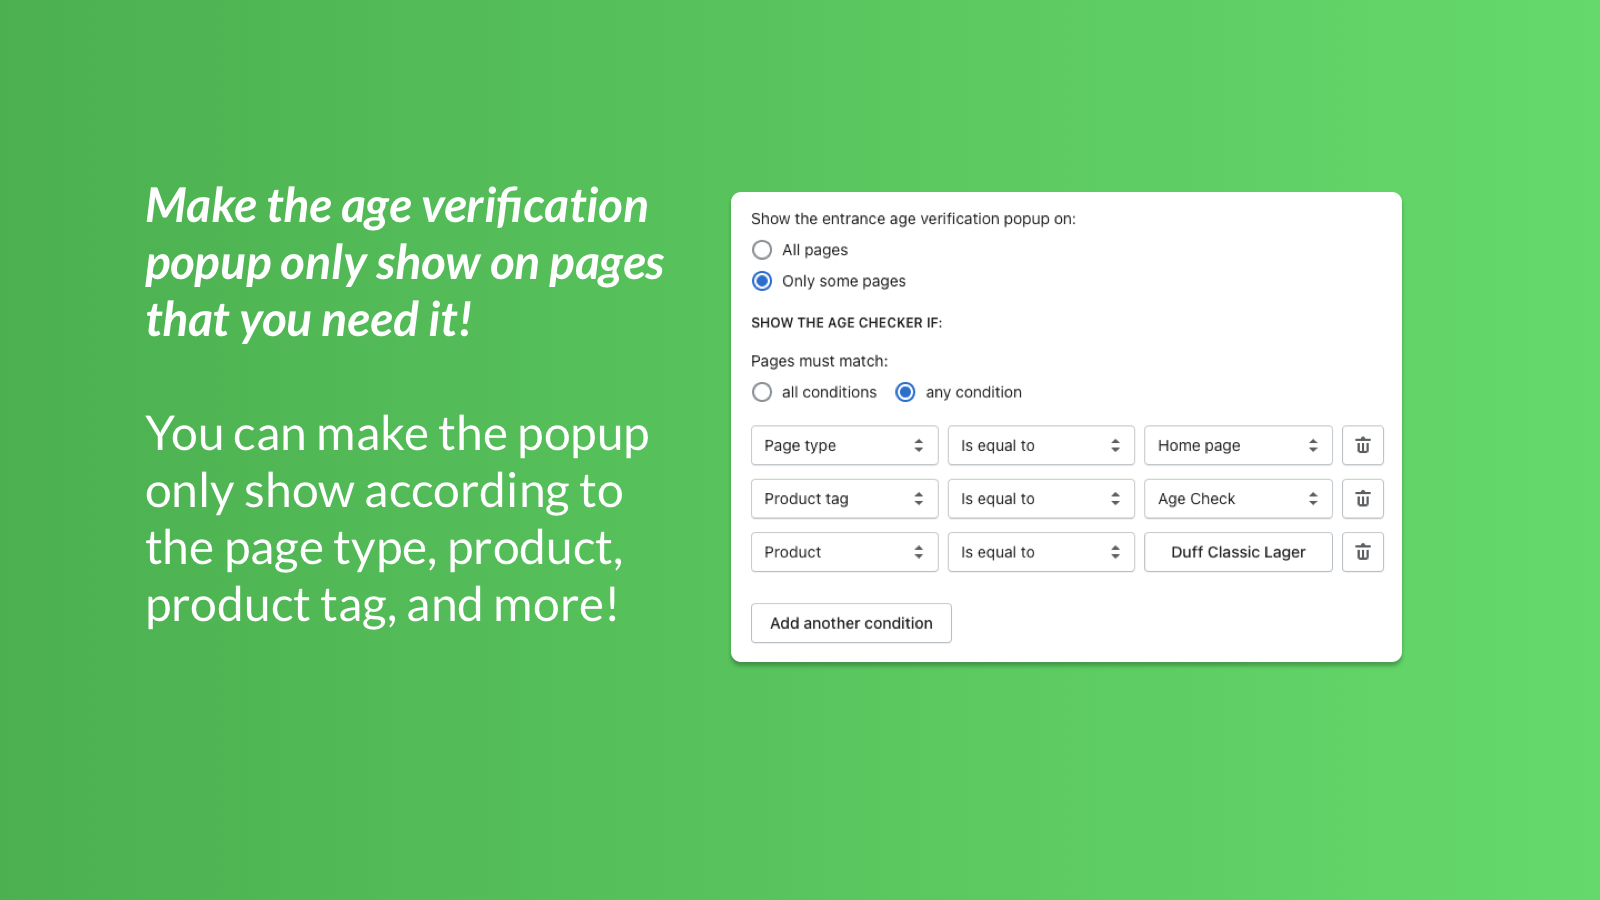 Show age verification popup only on pages that you need it